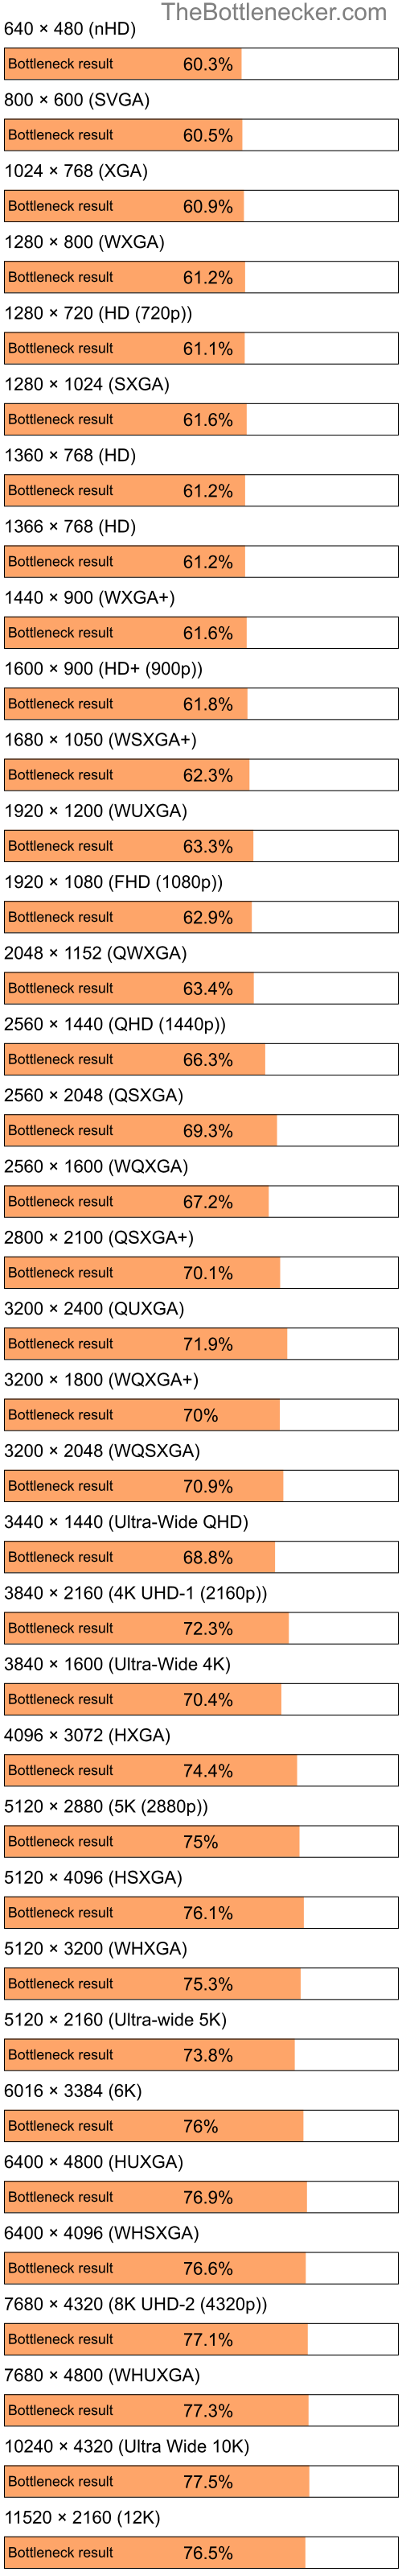 Bottleneck results by resolution for Intel Pentium 4 and NVIDIA Quadro NVS 295 in General Tasks